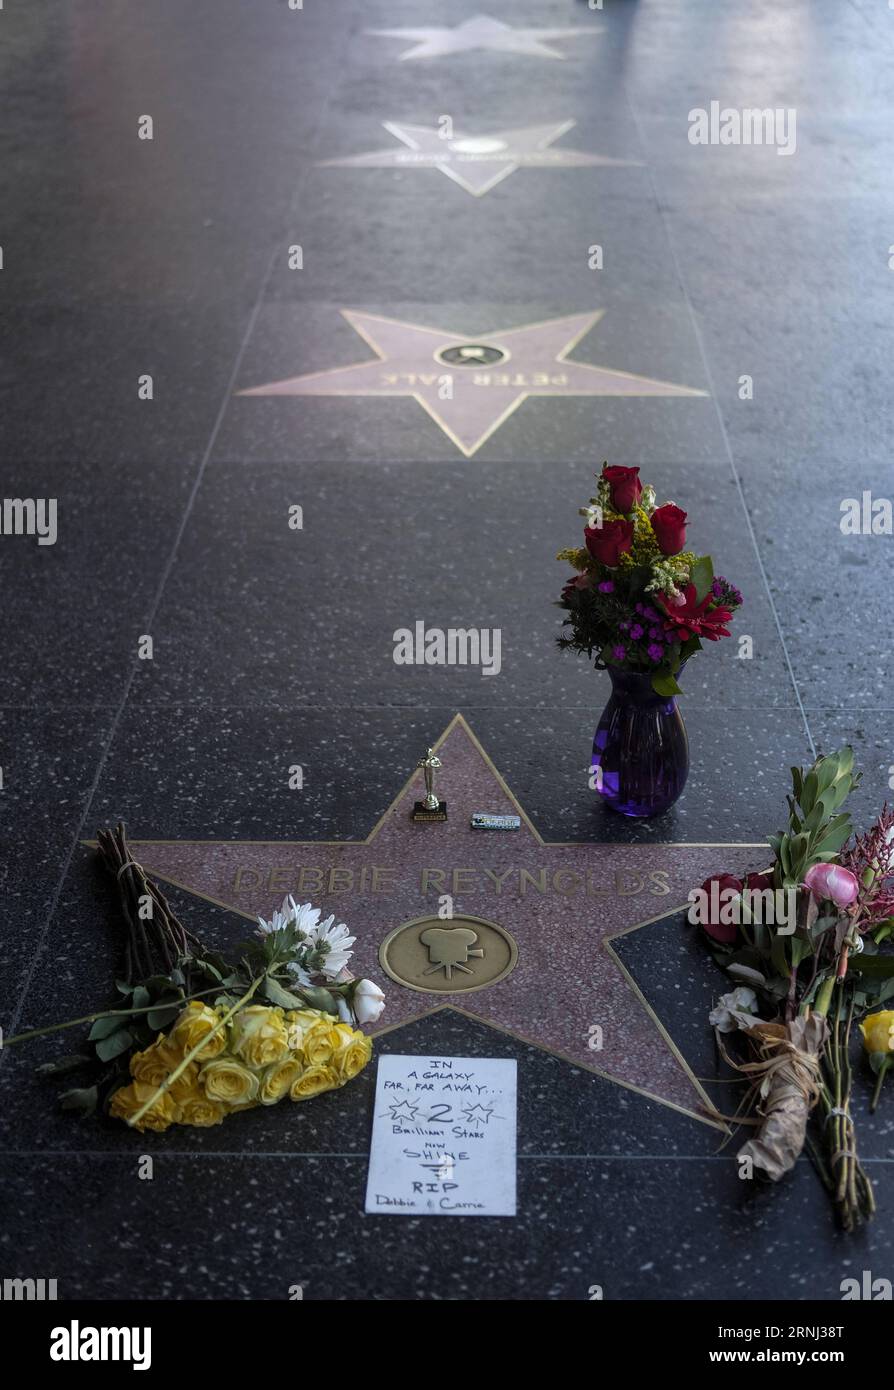 LOS ANGELES, Dec. 29, 2016 -- Flowers and candles surround the Hollywood Walk of Fame star of Debbie Reynolds, in Los Angeles, California, the United States, on Dec. 29, 2016. Hollywood star Debbie Reynolds died of stroke Wednesday at the age of 84, one day after her daughter Carrie Fisher s death. Carrie Fisher, the actress best known as Princess Leia in the Star Wars movie franchise, died at the age of 60 on Tuesday morning, after suffering a heart attack on a flight last Friday. ) (zw) U.S.-LOS ANGELES-DEBBIE REYNOLDS-CARRIE FISHER-WALK OF FAME-CONDOLENCE ZhaoxHanrong PUBLICATIONxNOTxINxCHN Stock Photo